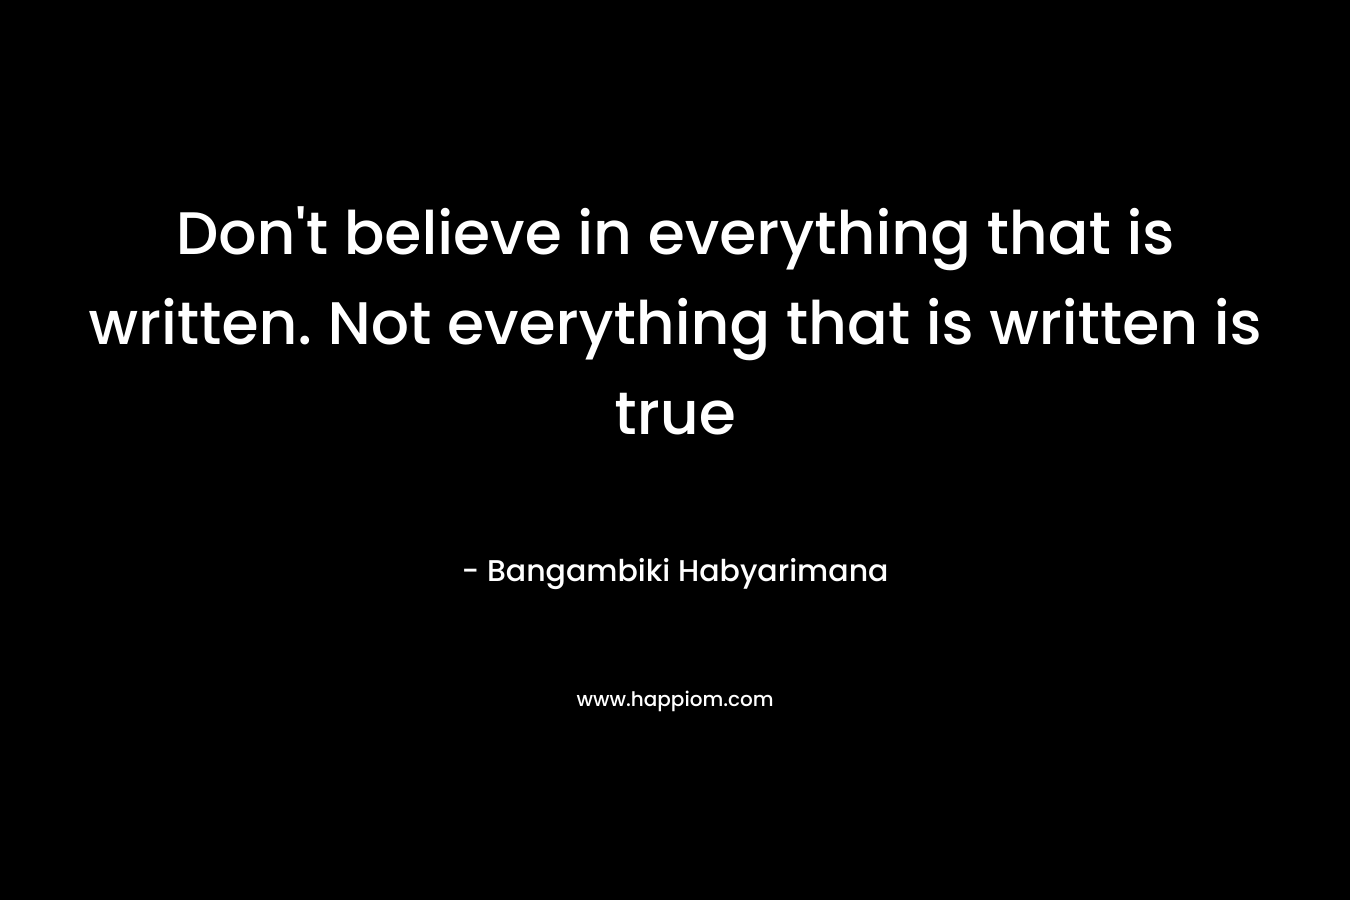 Don't believe in everything that is written. Not everything that is written is true